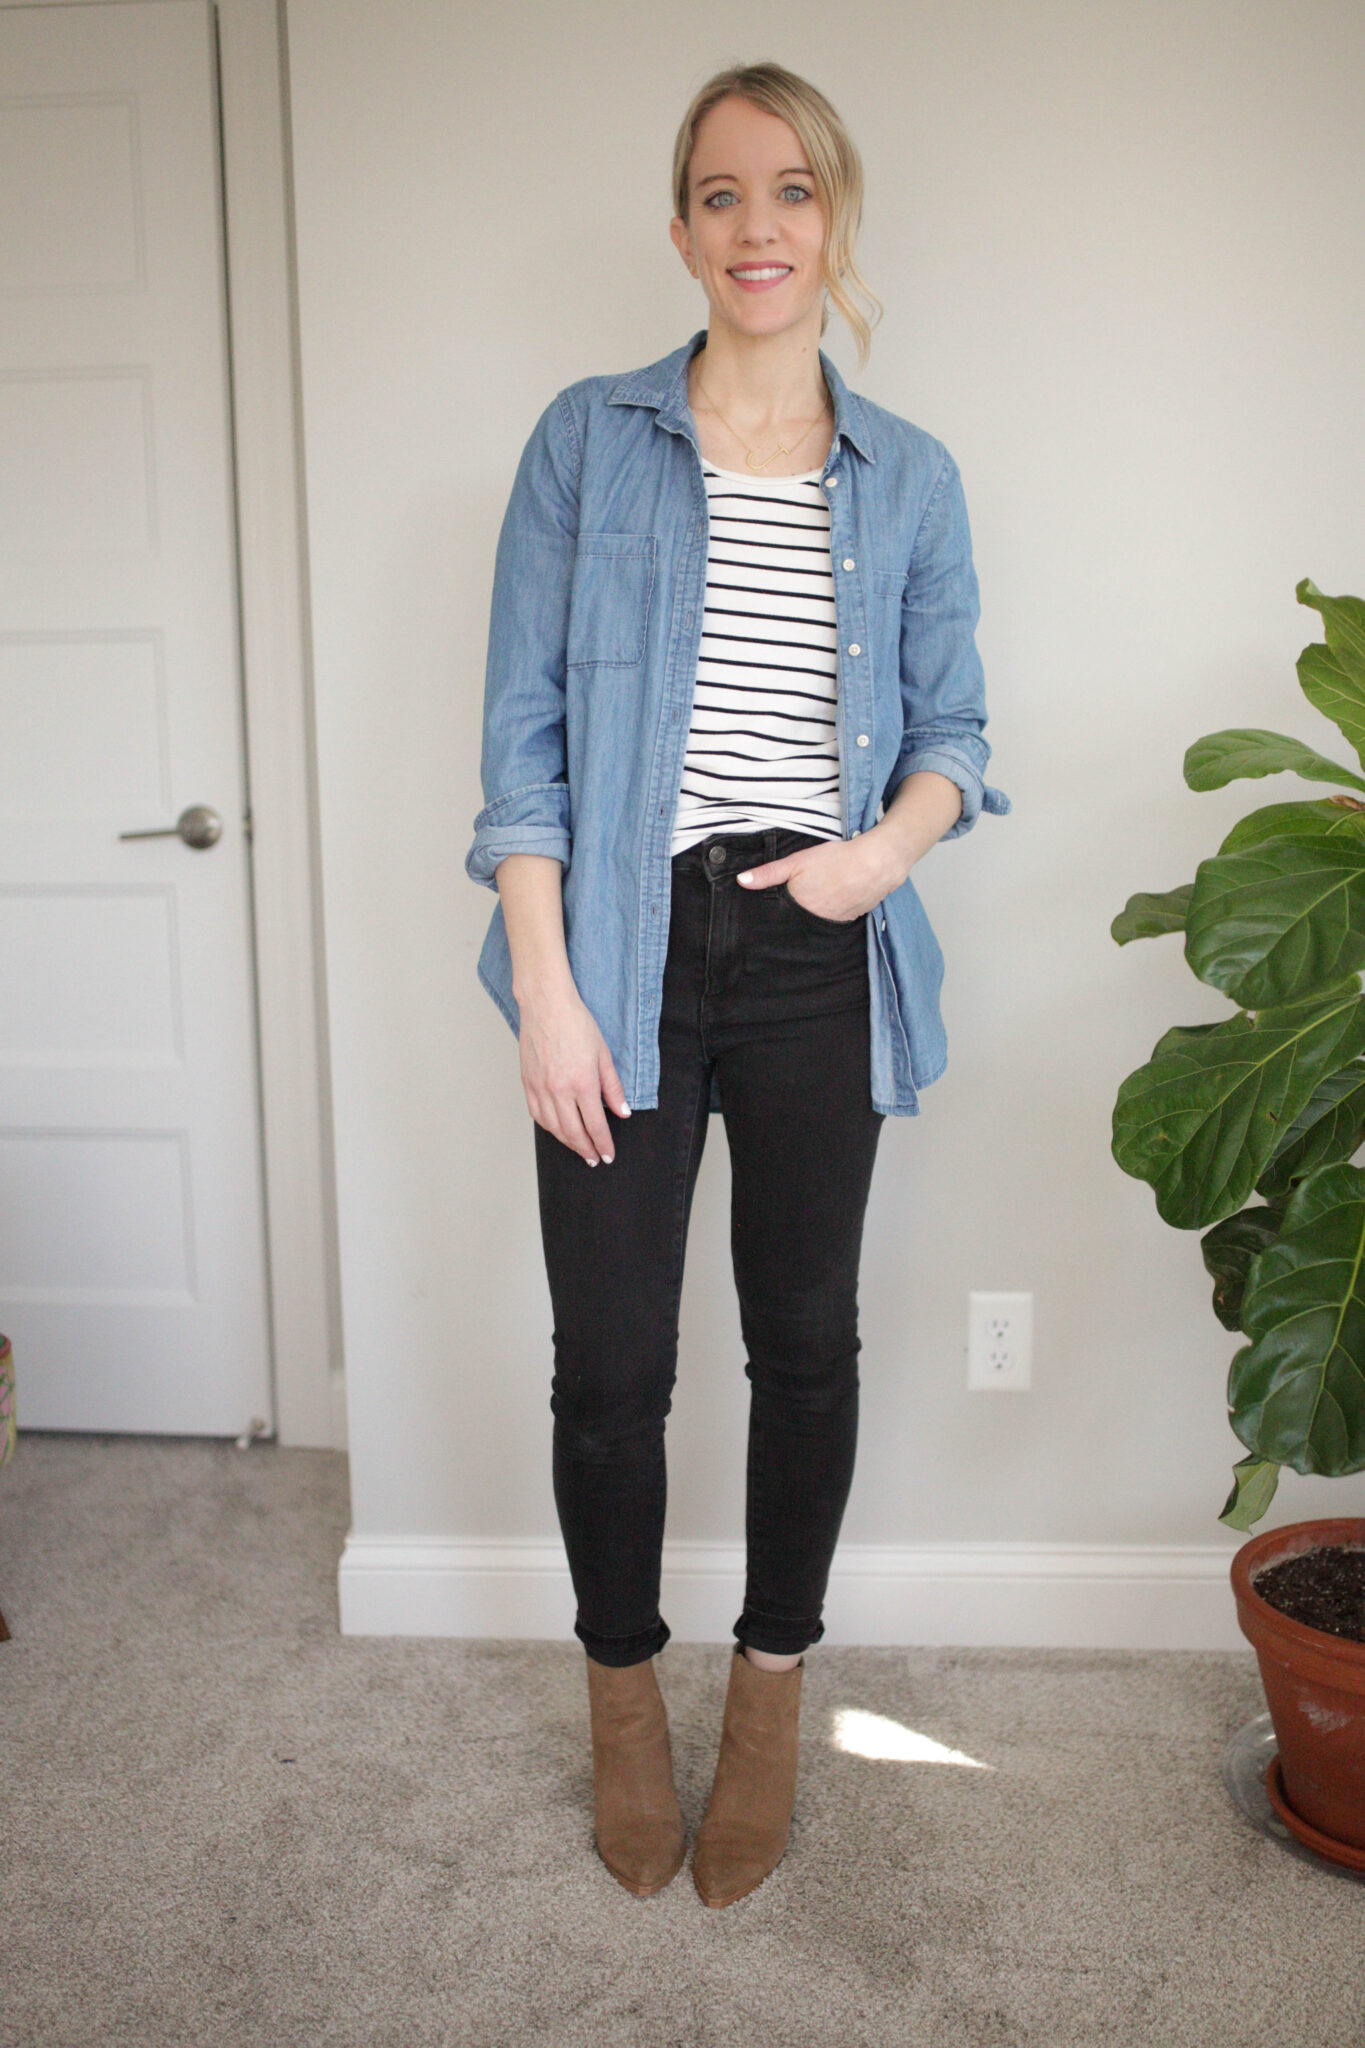 Stripe Top with Chambray